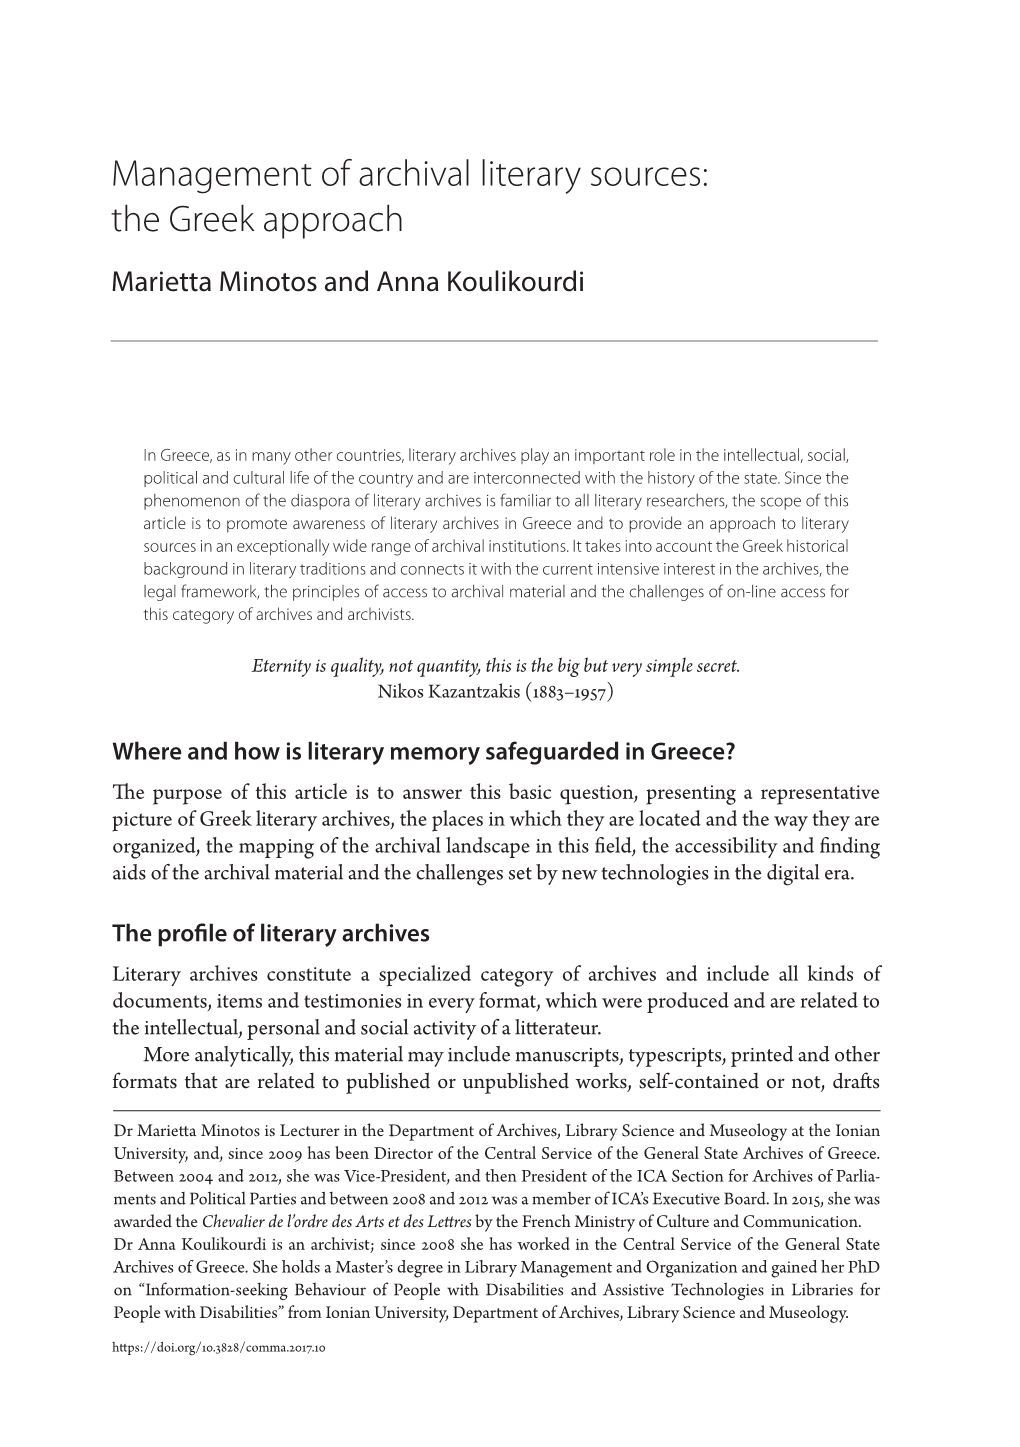 Management of Archival Literary Sources: the Greek Approach Marietta Minotos and Anna Koulikourdi